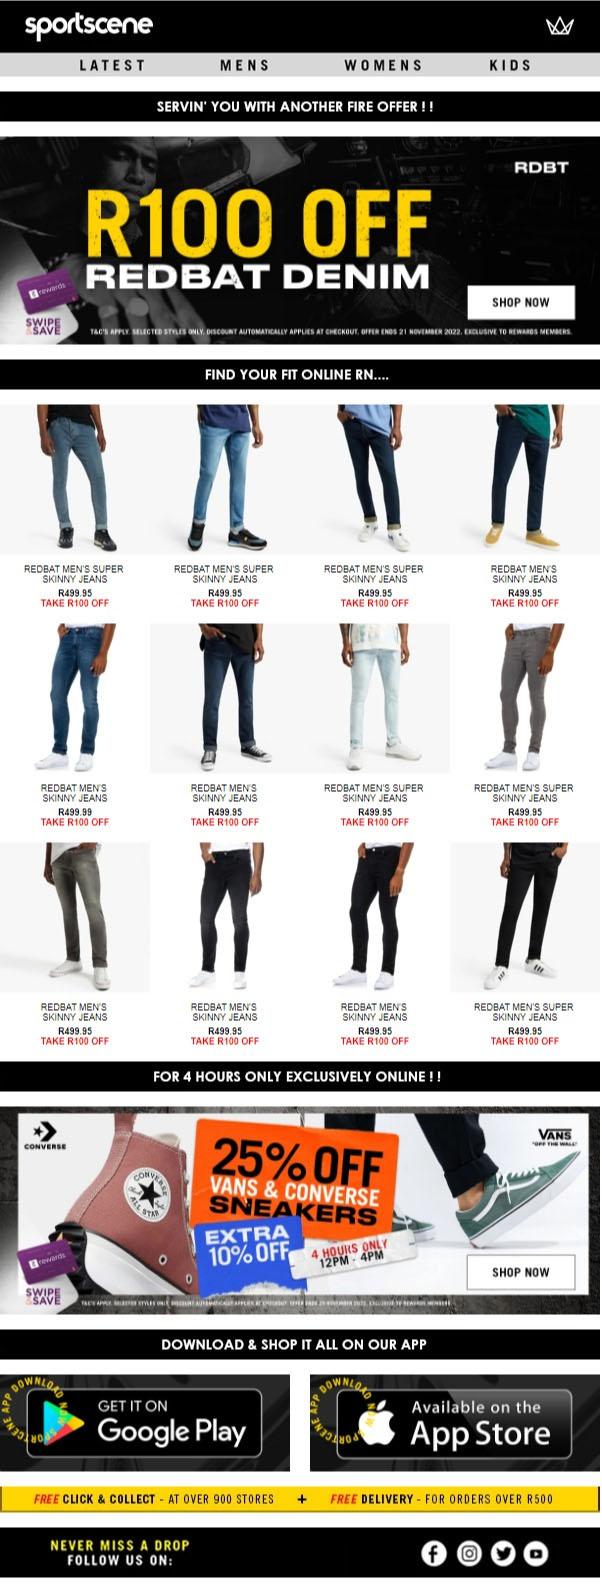 How Much Are Redbat Jeans In South Africa?